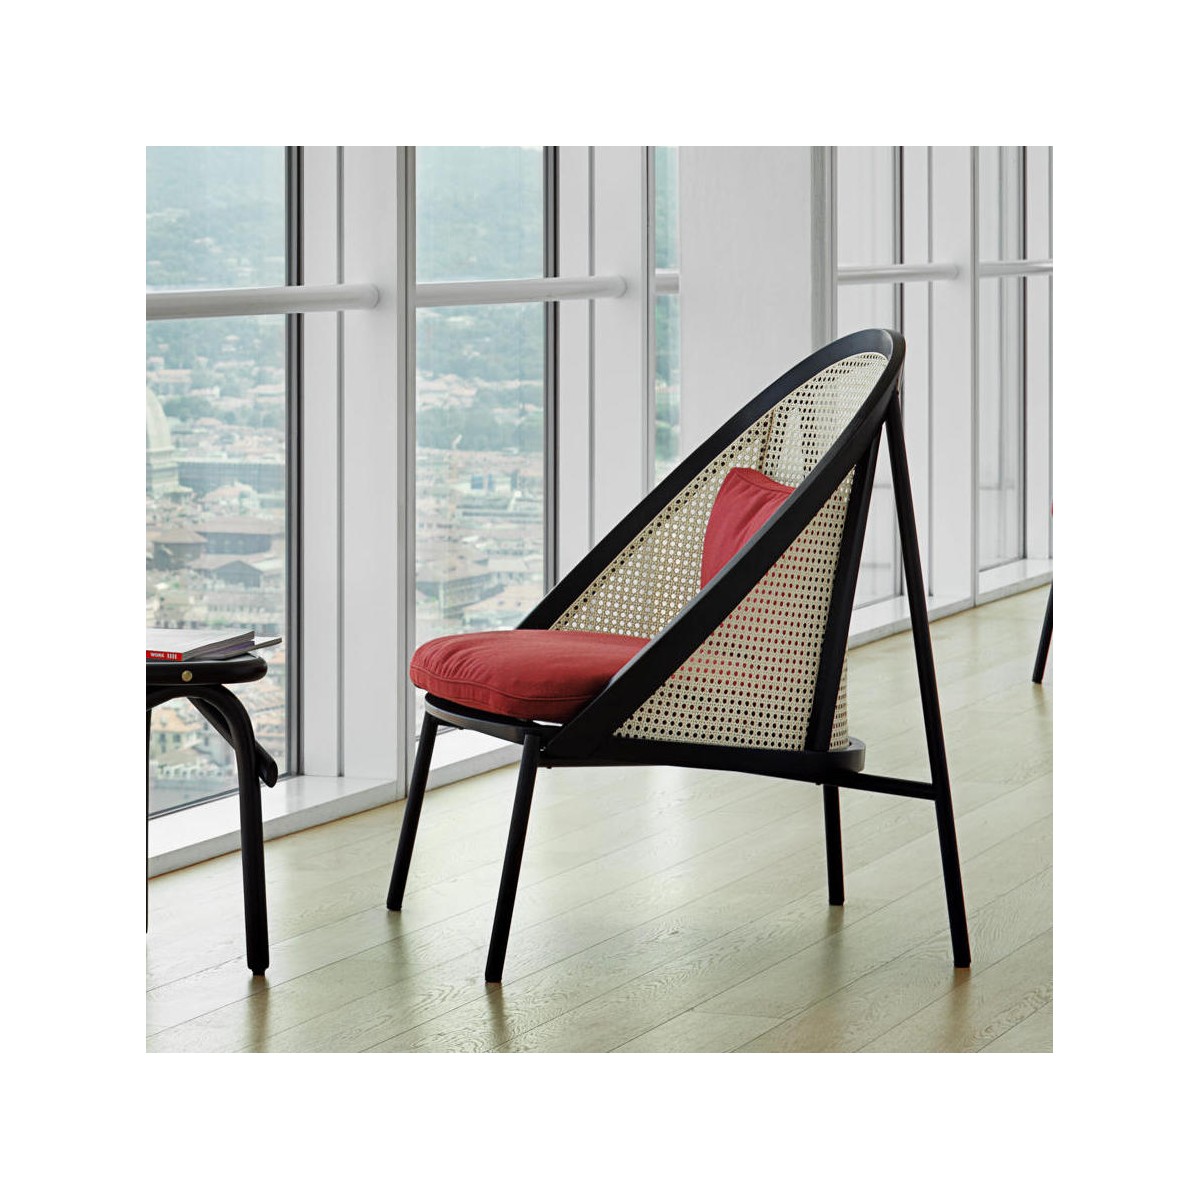 Loïe lounge chair - black lacquered ash, Twill Weave fabric colour 570, woven cane backrest